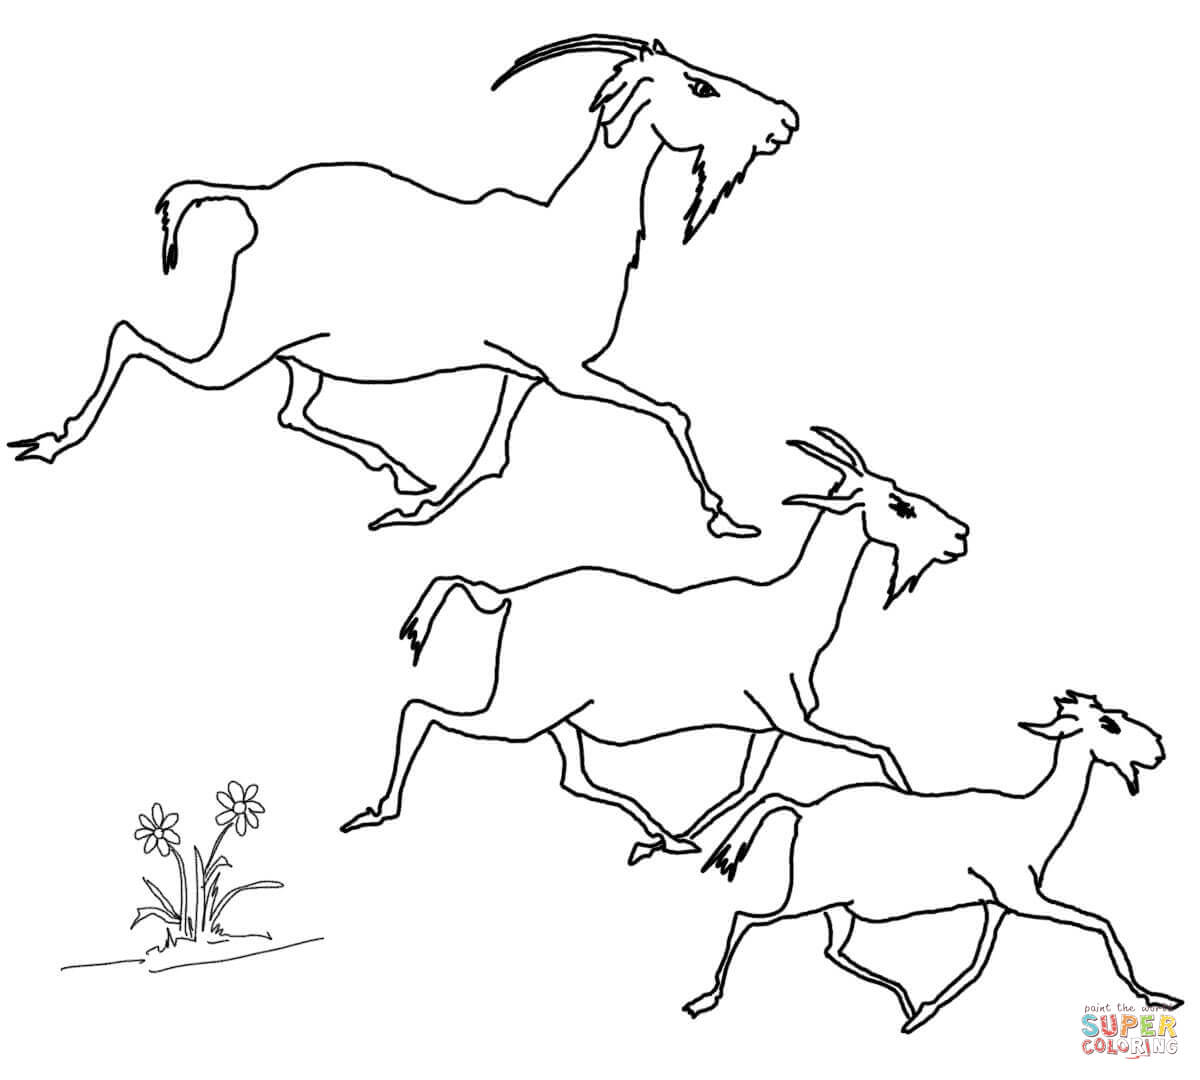 Three billy goats gruff coloring pages | Free Coloring Pages